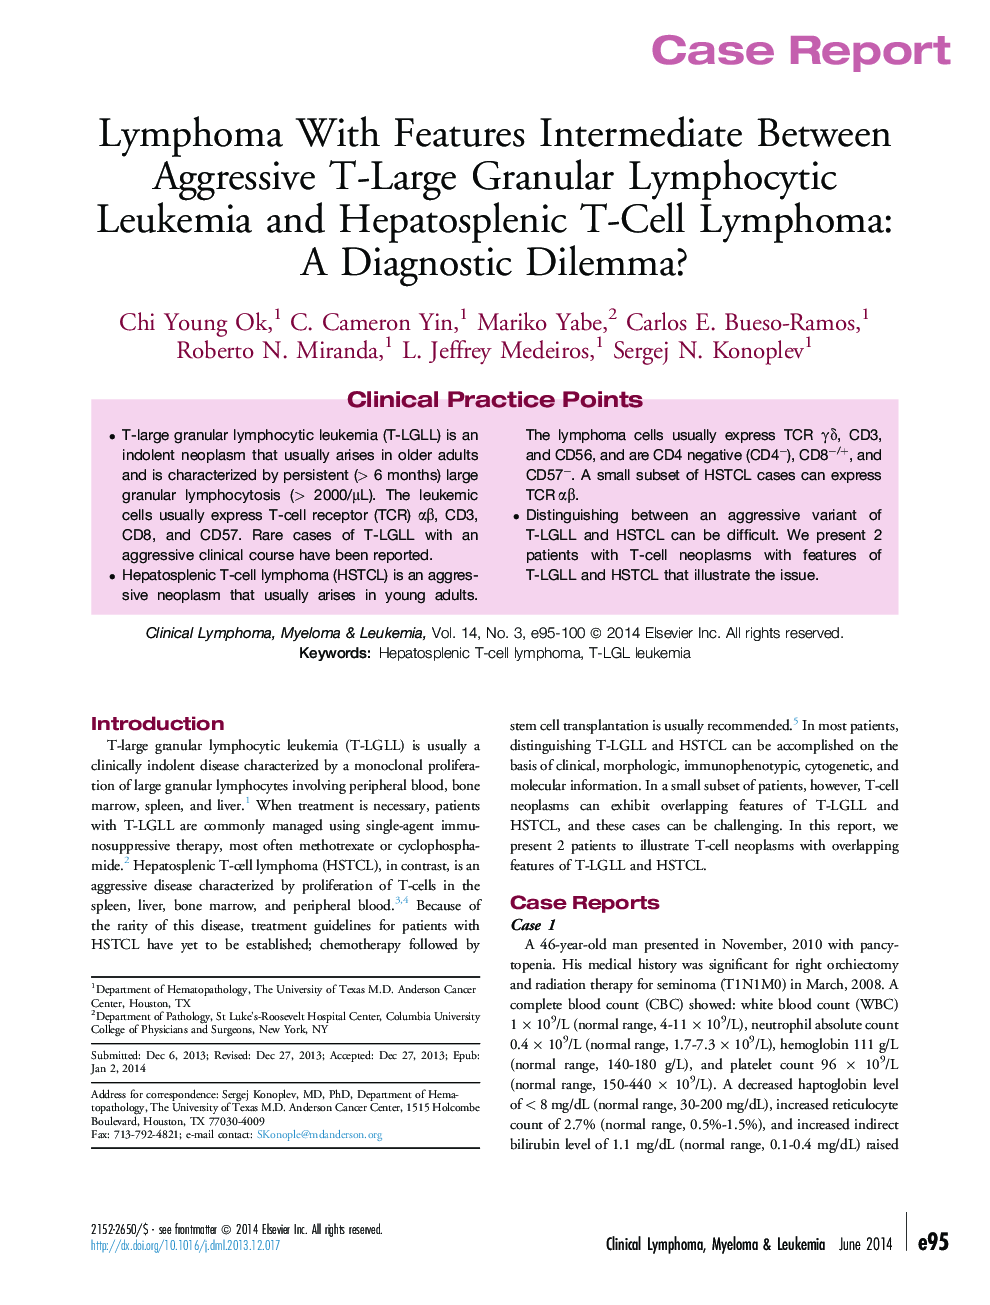 Lymphoma With Features Intermediate Between Aggressive T-Large Granular Lymphocytic Leukemia and Hepatosplenic T-Cell Lymphoma: A Diagnostic Dilemma?